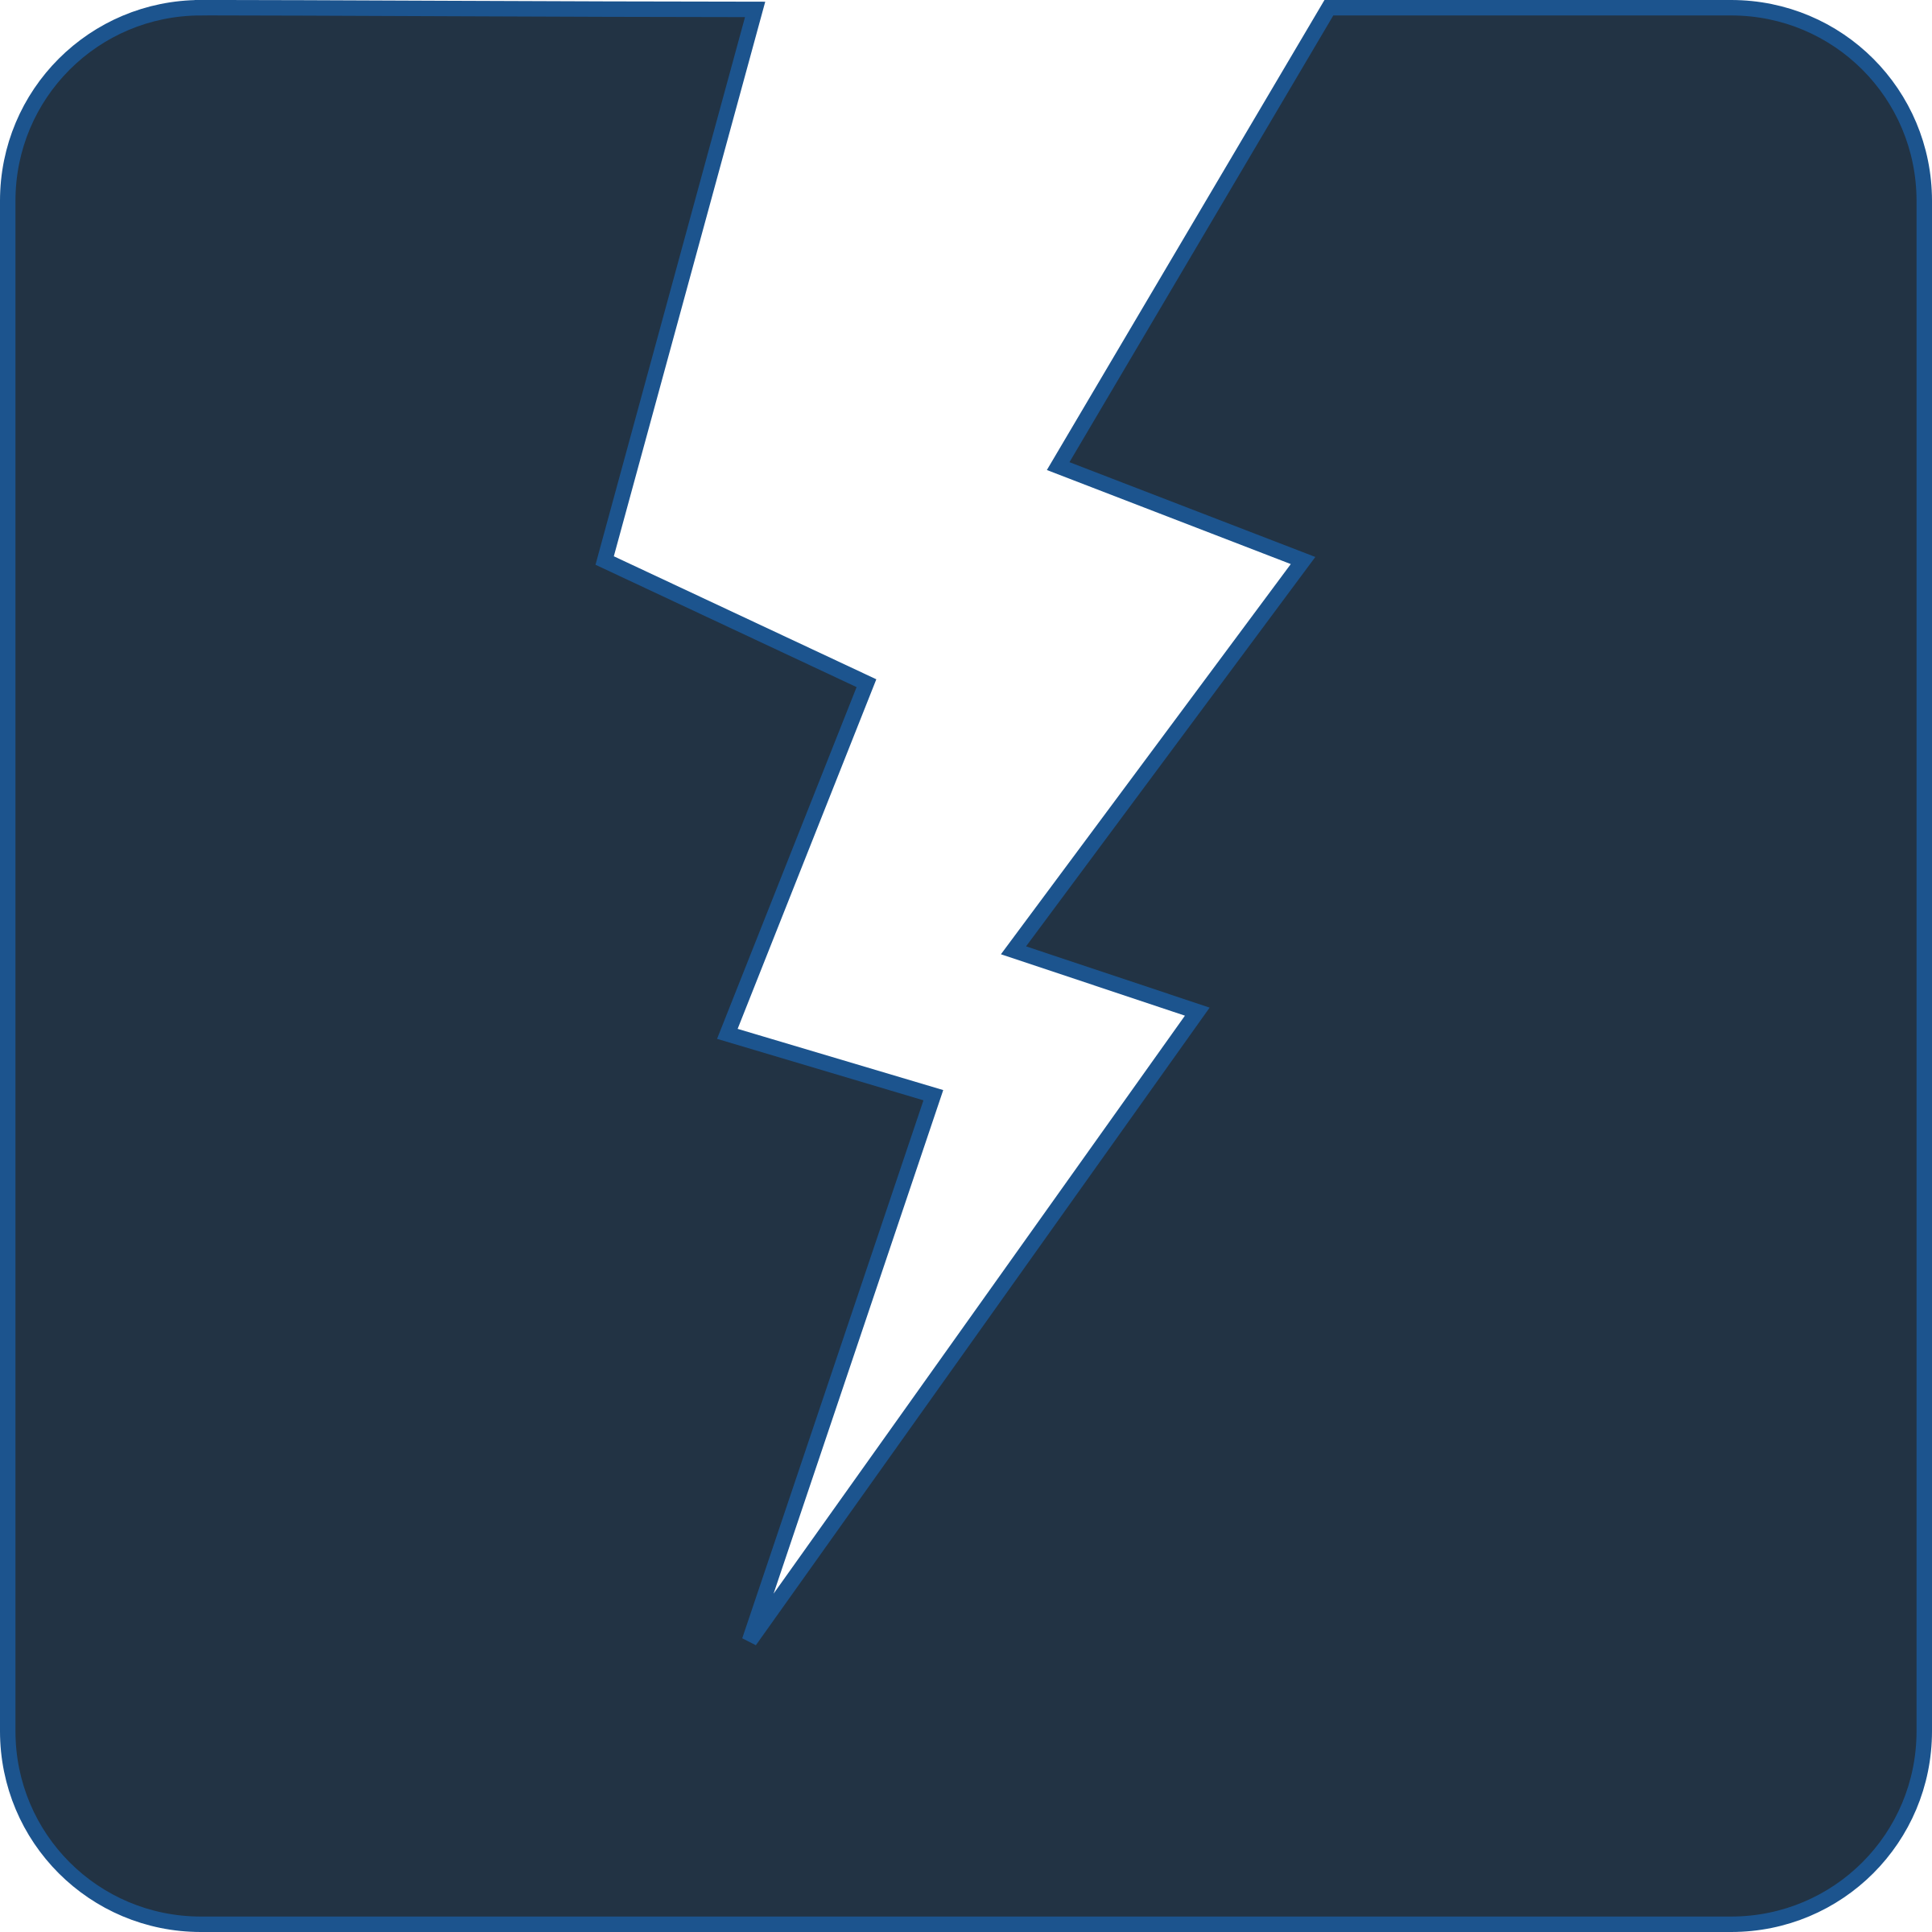 electricity clipart icon